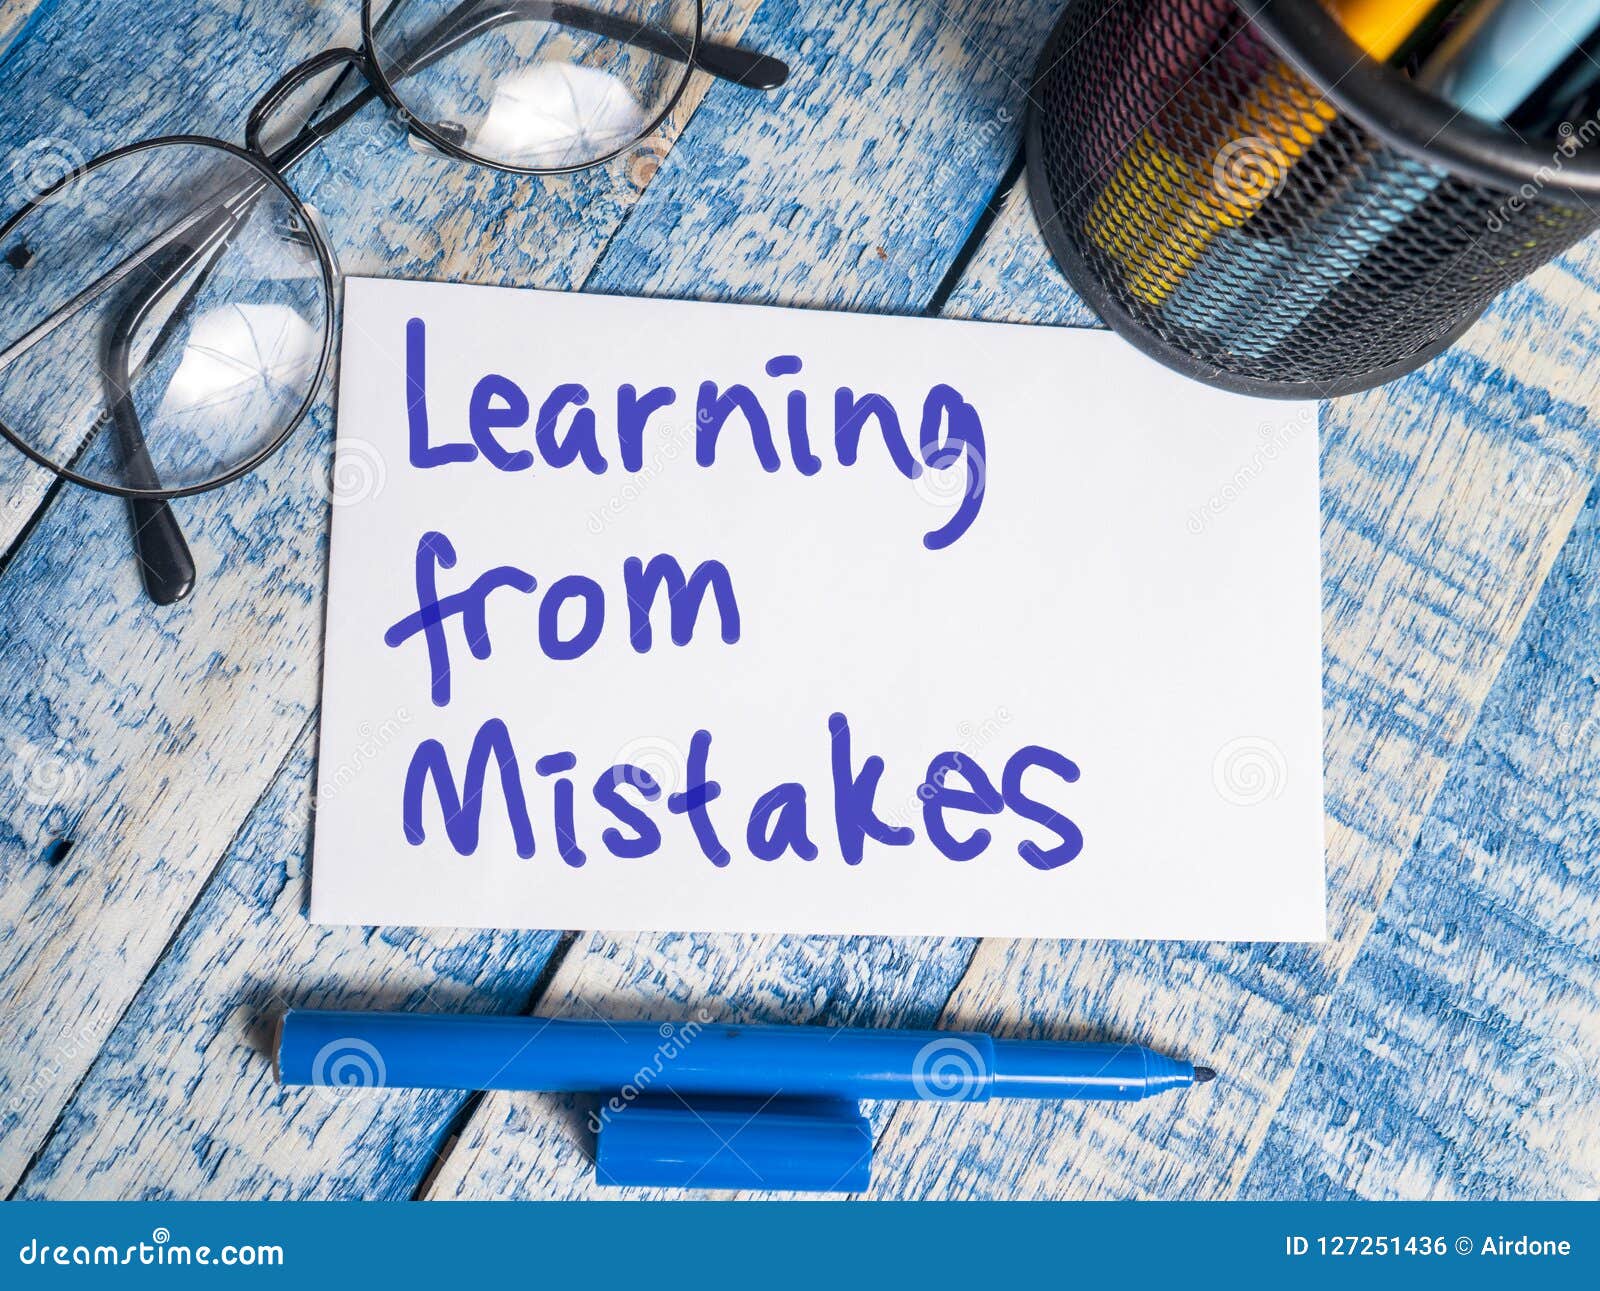 learning from mistakes, motivational words quotes concept